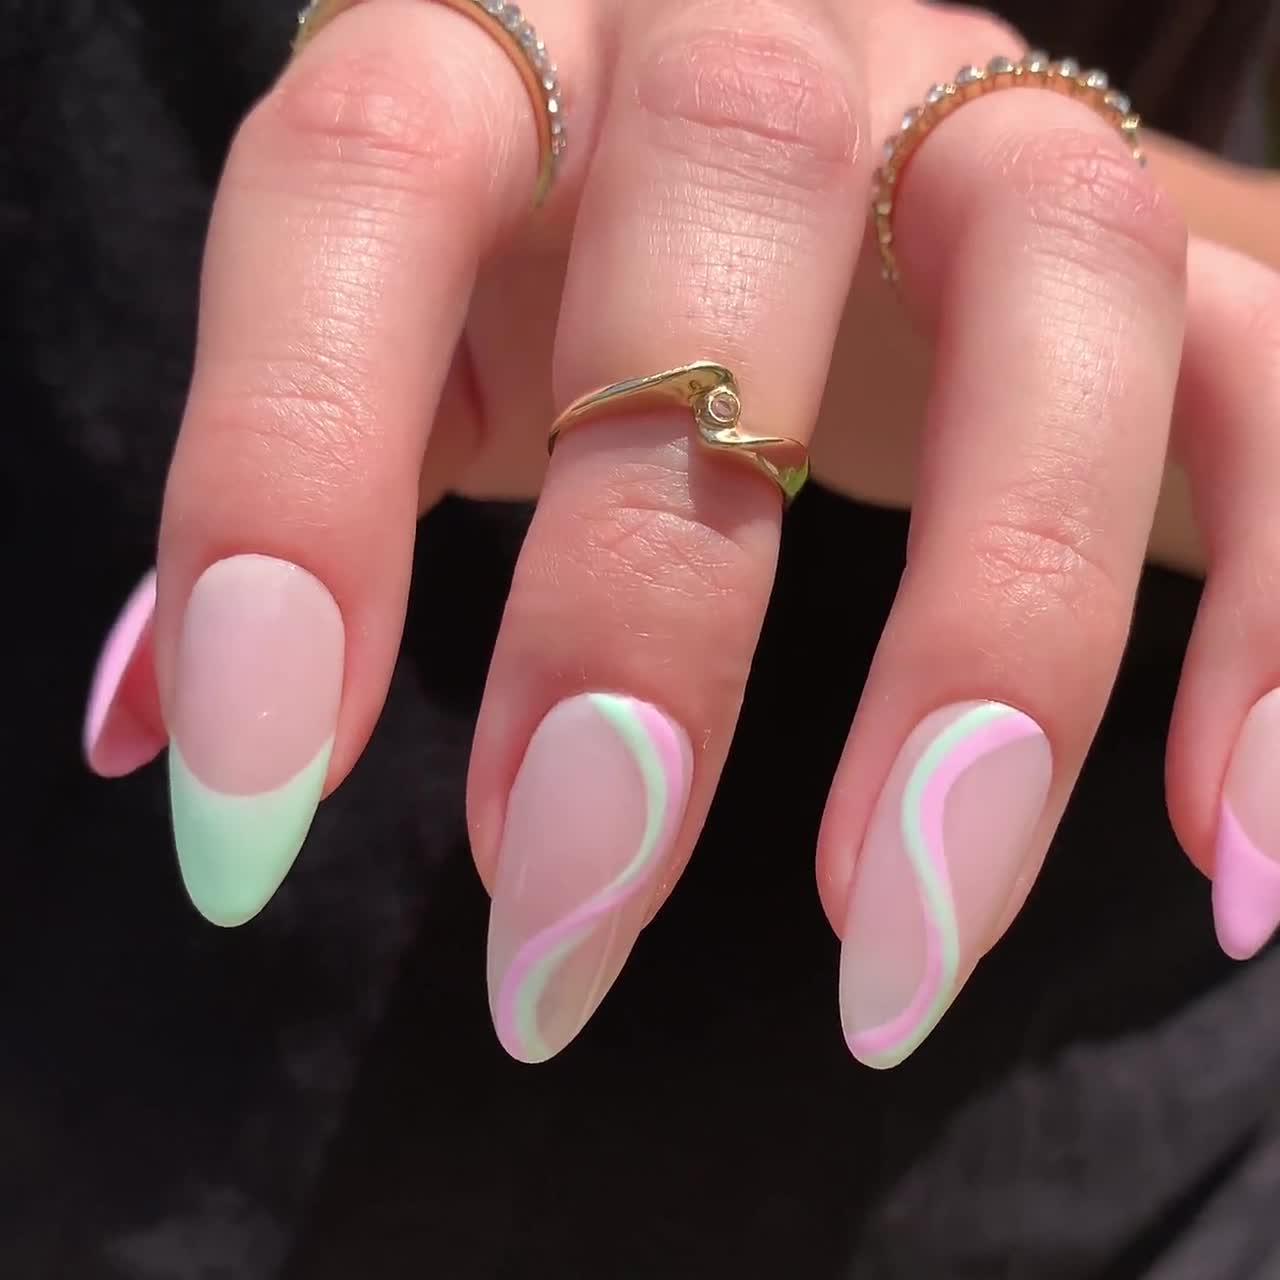 Nude Almond Press On Cute Fake Nails With Y2K Star Diamond Designs For Cool  Girls And Women Fukk Cover Nail Tips Included 230927 From Kang06, $9.17 |  DHgate.Com